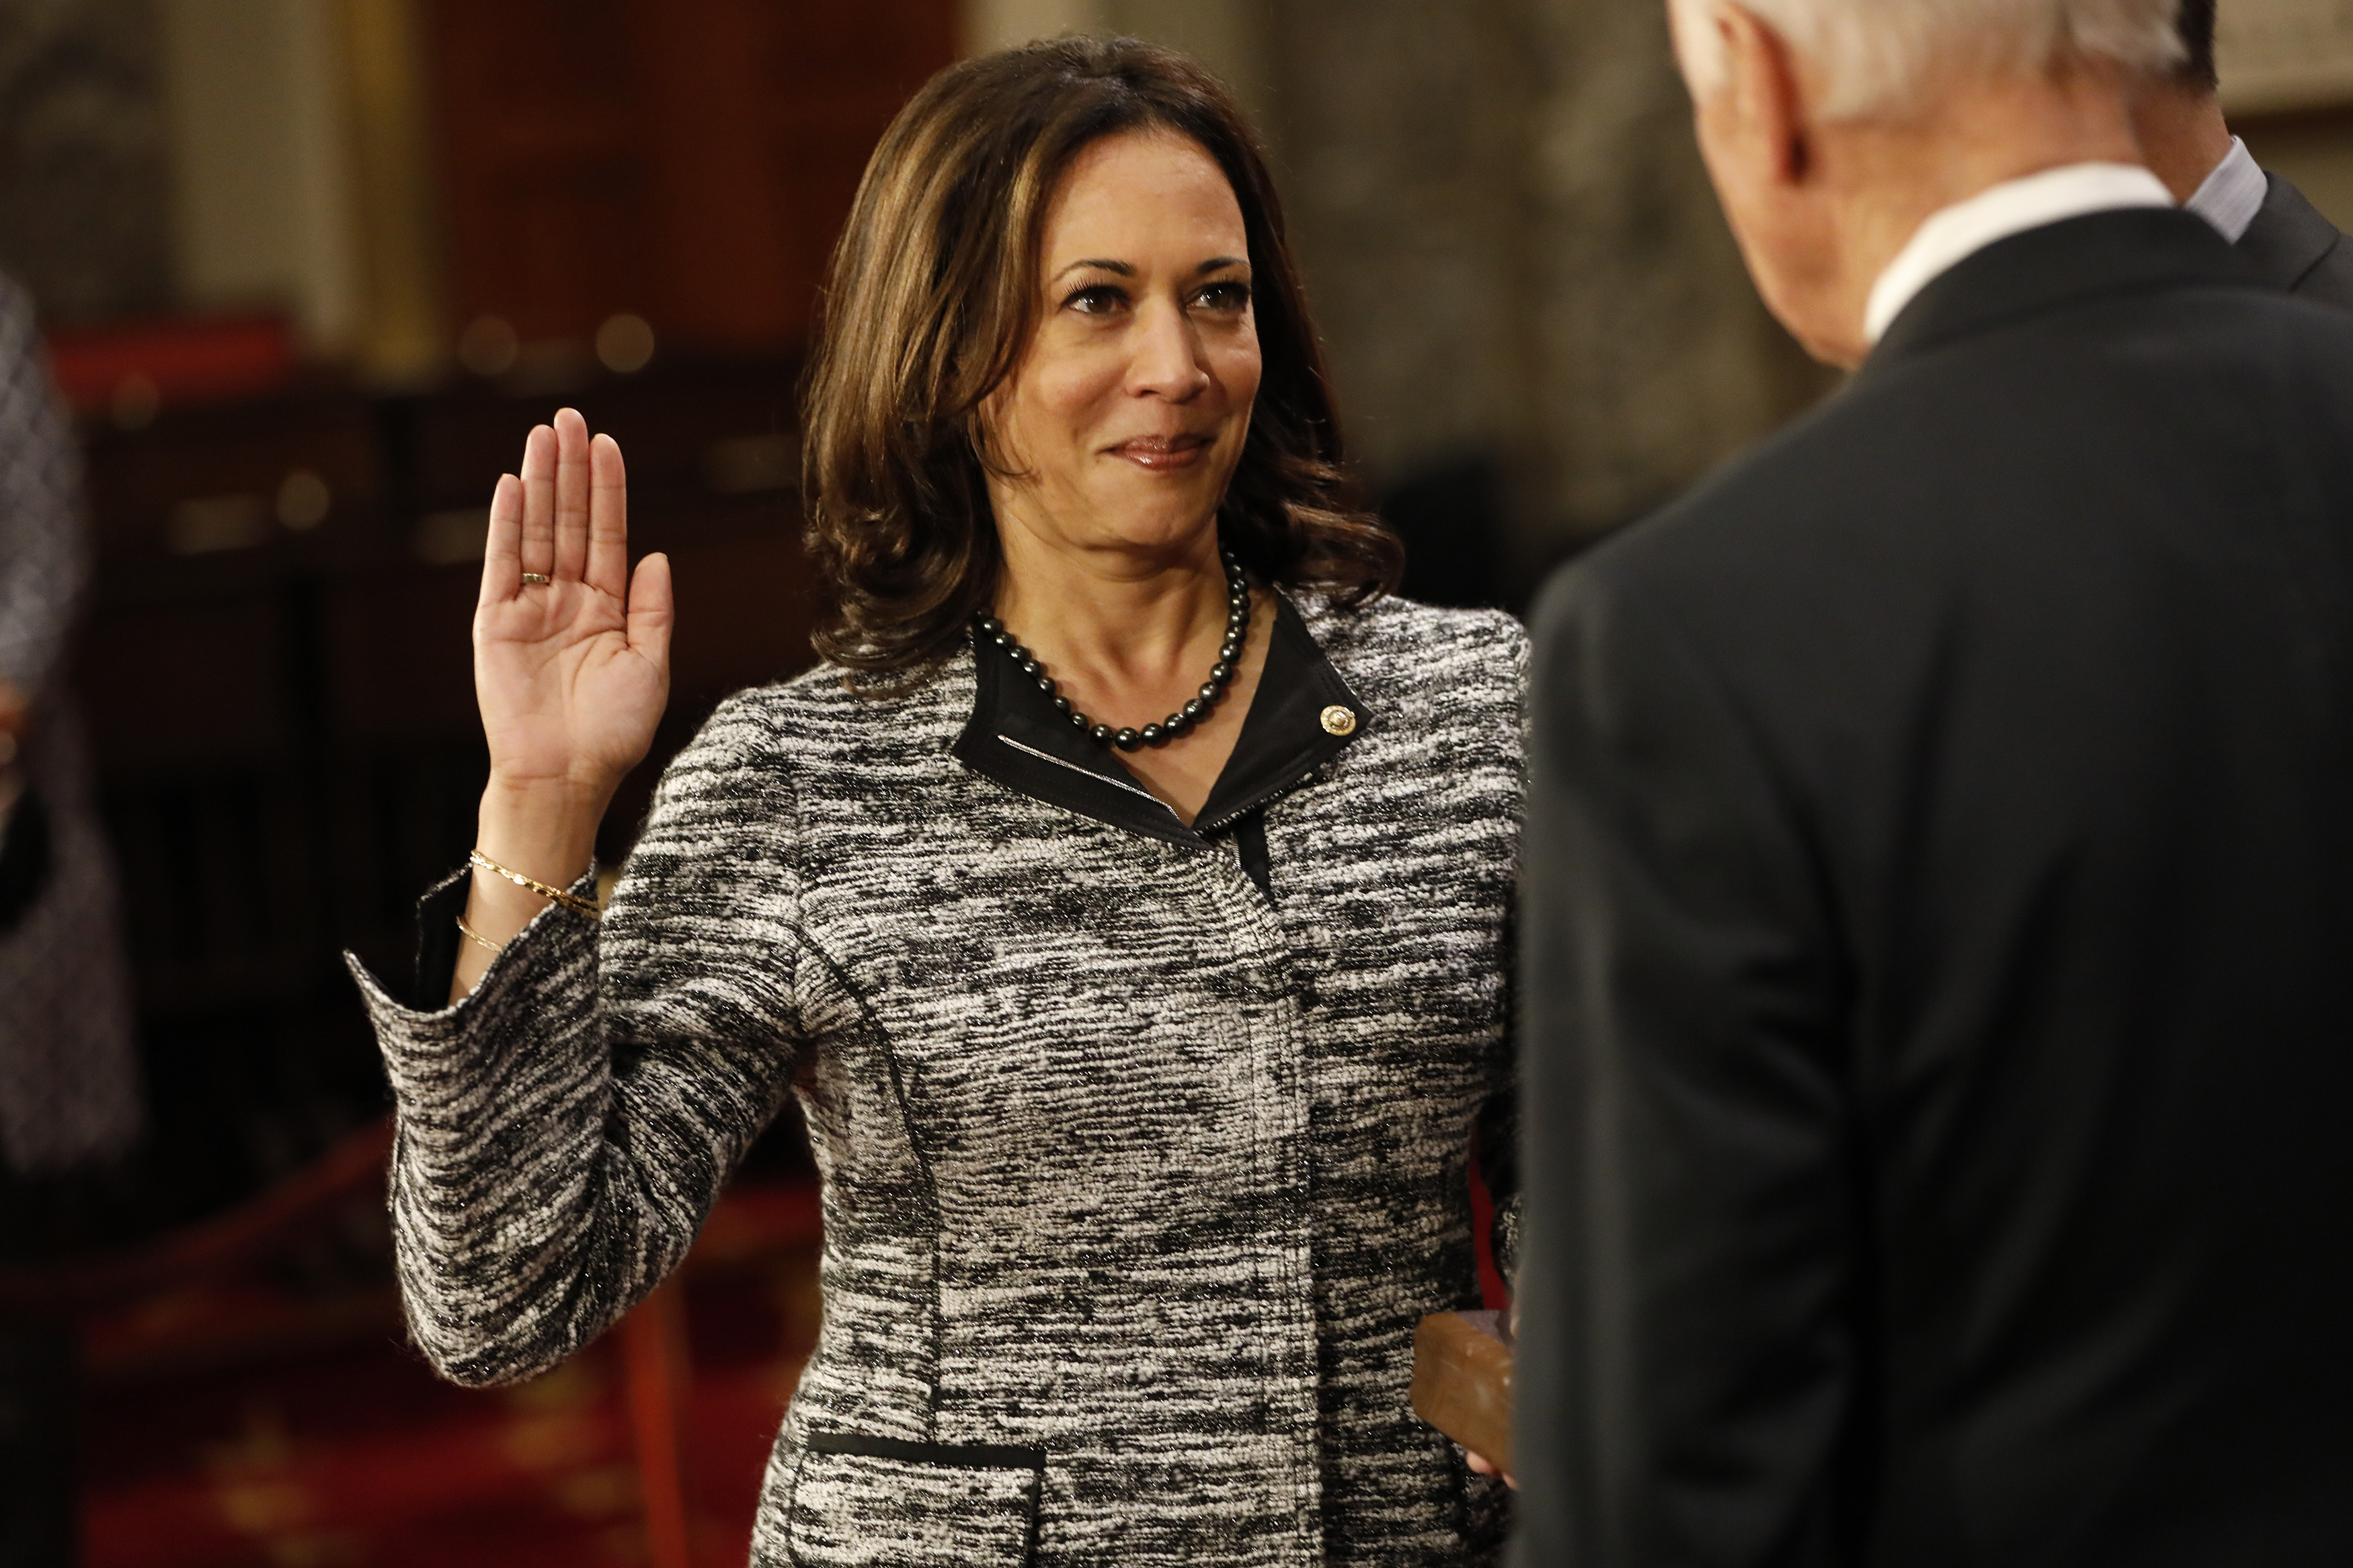 WASHINGTON, DC - JANUARY 3: U.S. Sen. Kamala Harris (D-CA) participates in a reenacted swearing-in with U.S. Vice President Joe Biden in the Old Senate Chamber at the U.S. Capitol January 3, 2017 in Washington, DC. Earlier in the day Biden swore in the newly elected and returning members on the Senate floor. (Photo by Aaron P. Bernstein/Getty Images) (Aaron P. Bernstein/Getty Images)